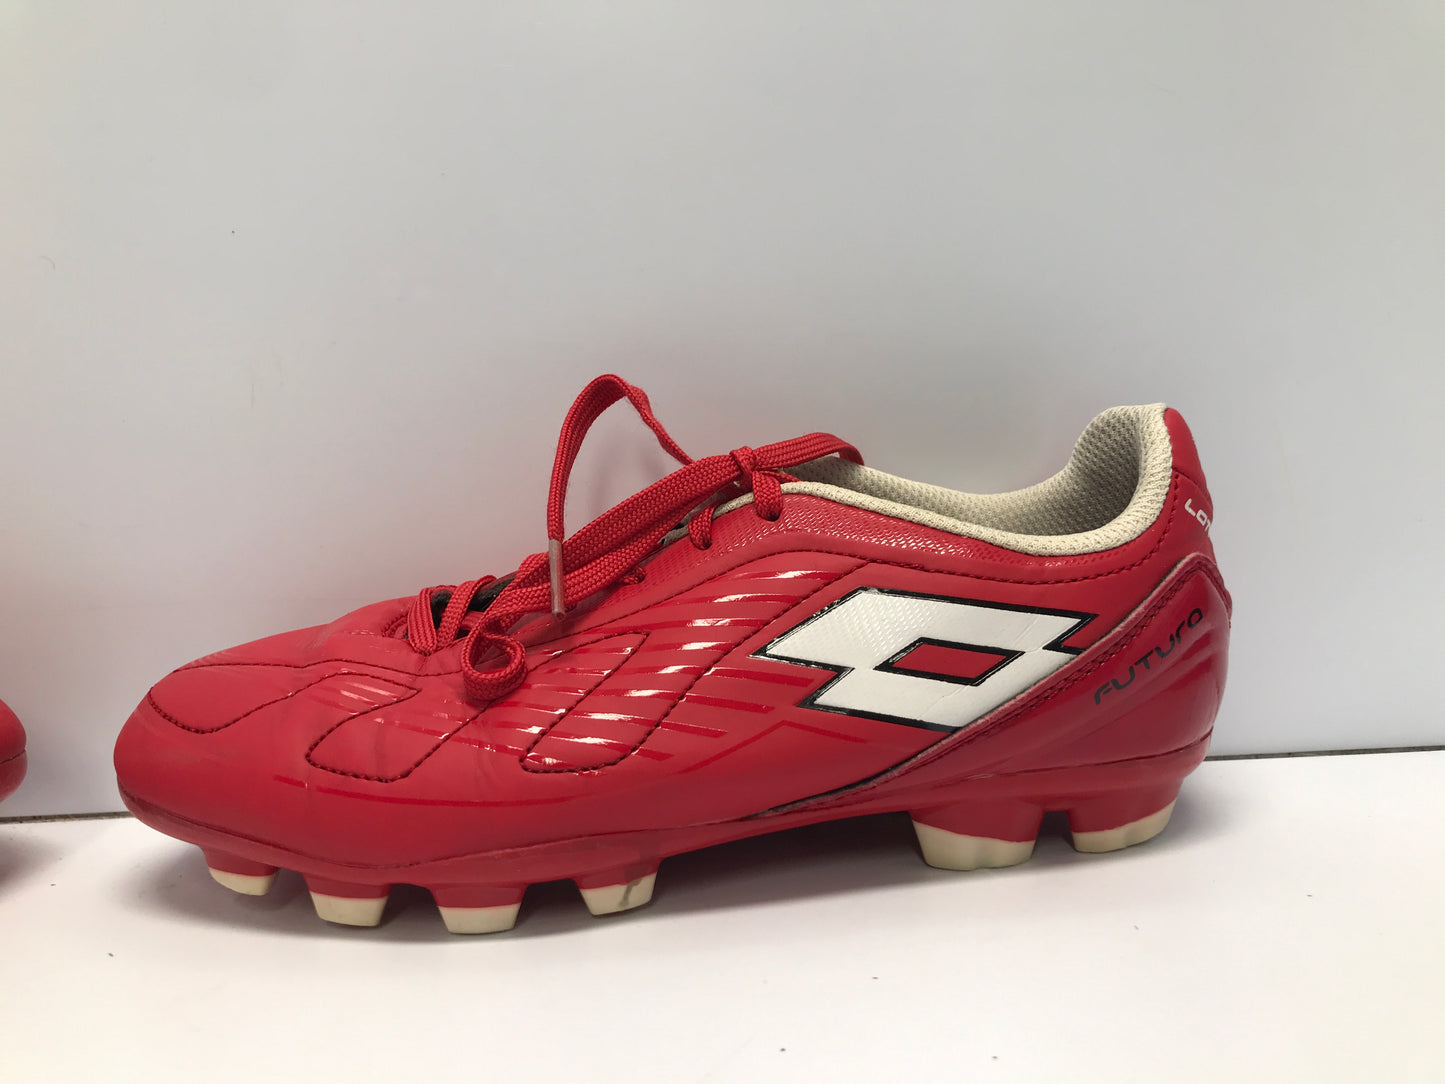 Soccer Shoes Cleats Child Size 3 Lotto Red White Excellent